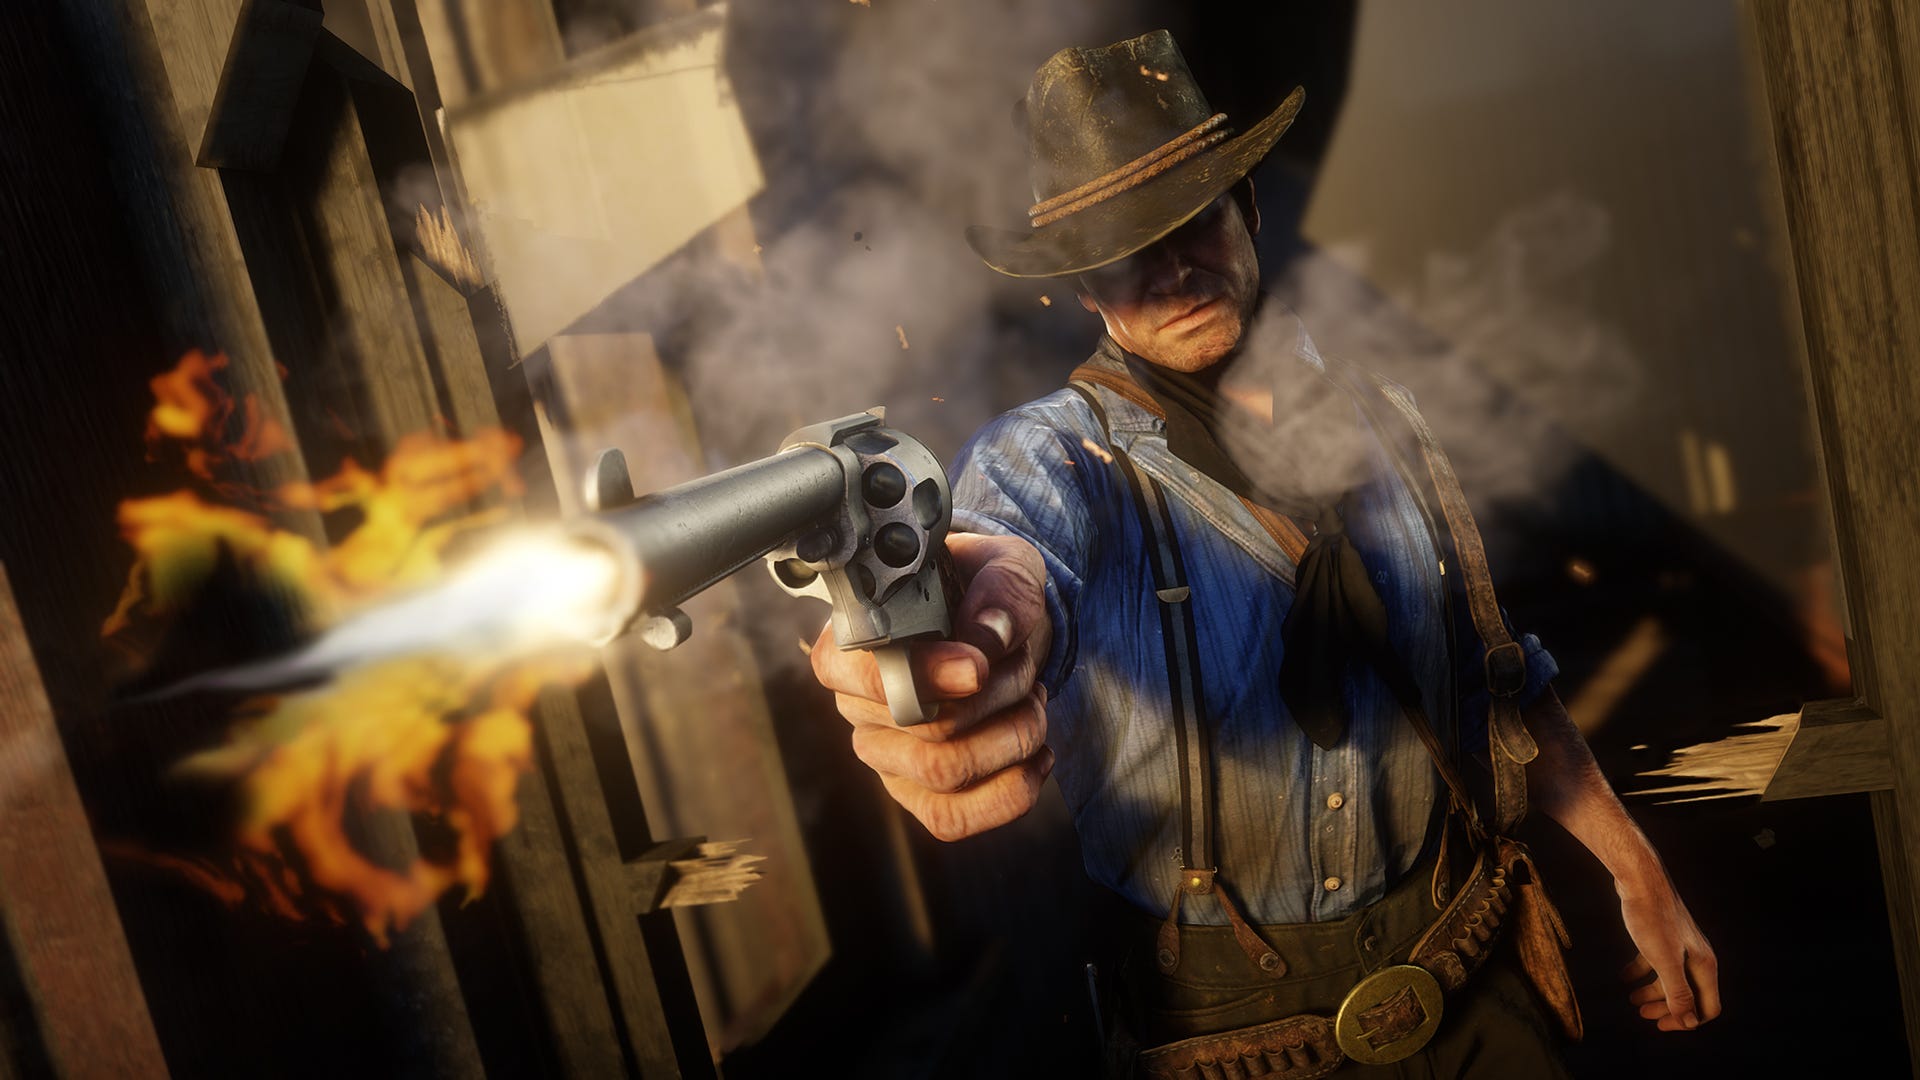 5 interesting facts in RDR 2: the story of Arthur Morgan's